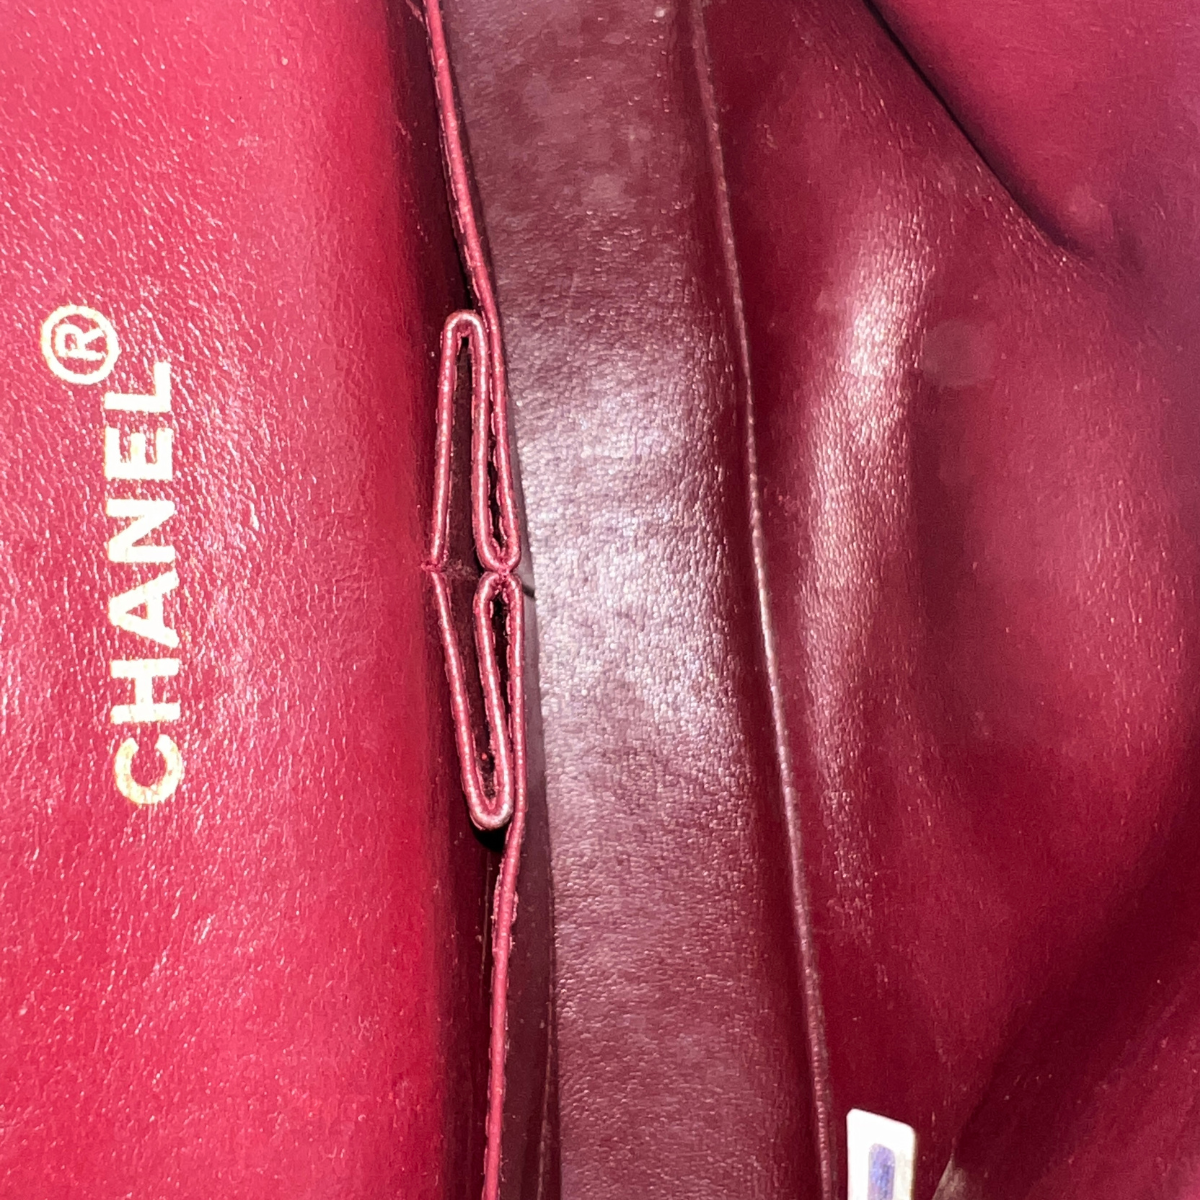 Vintage Chanel Small Classic Double Flap Pink Lambskin Gold